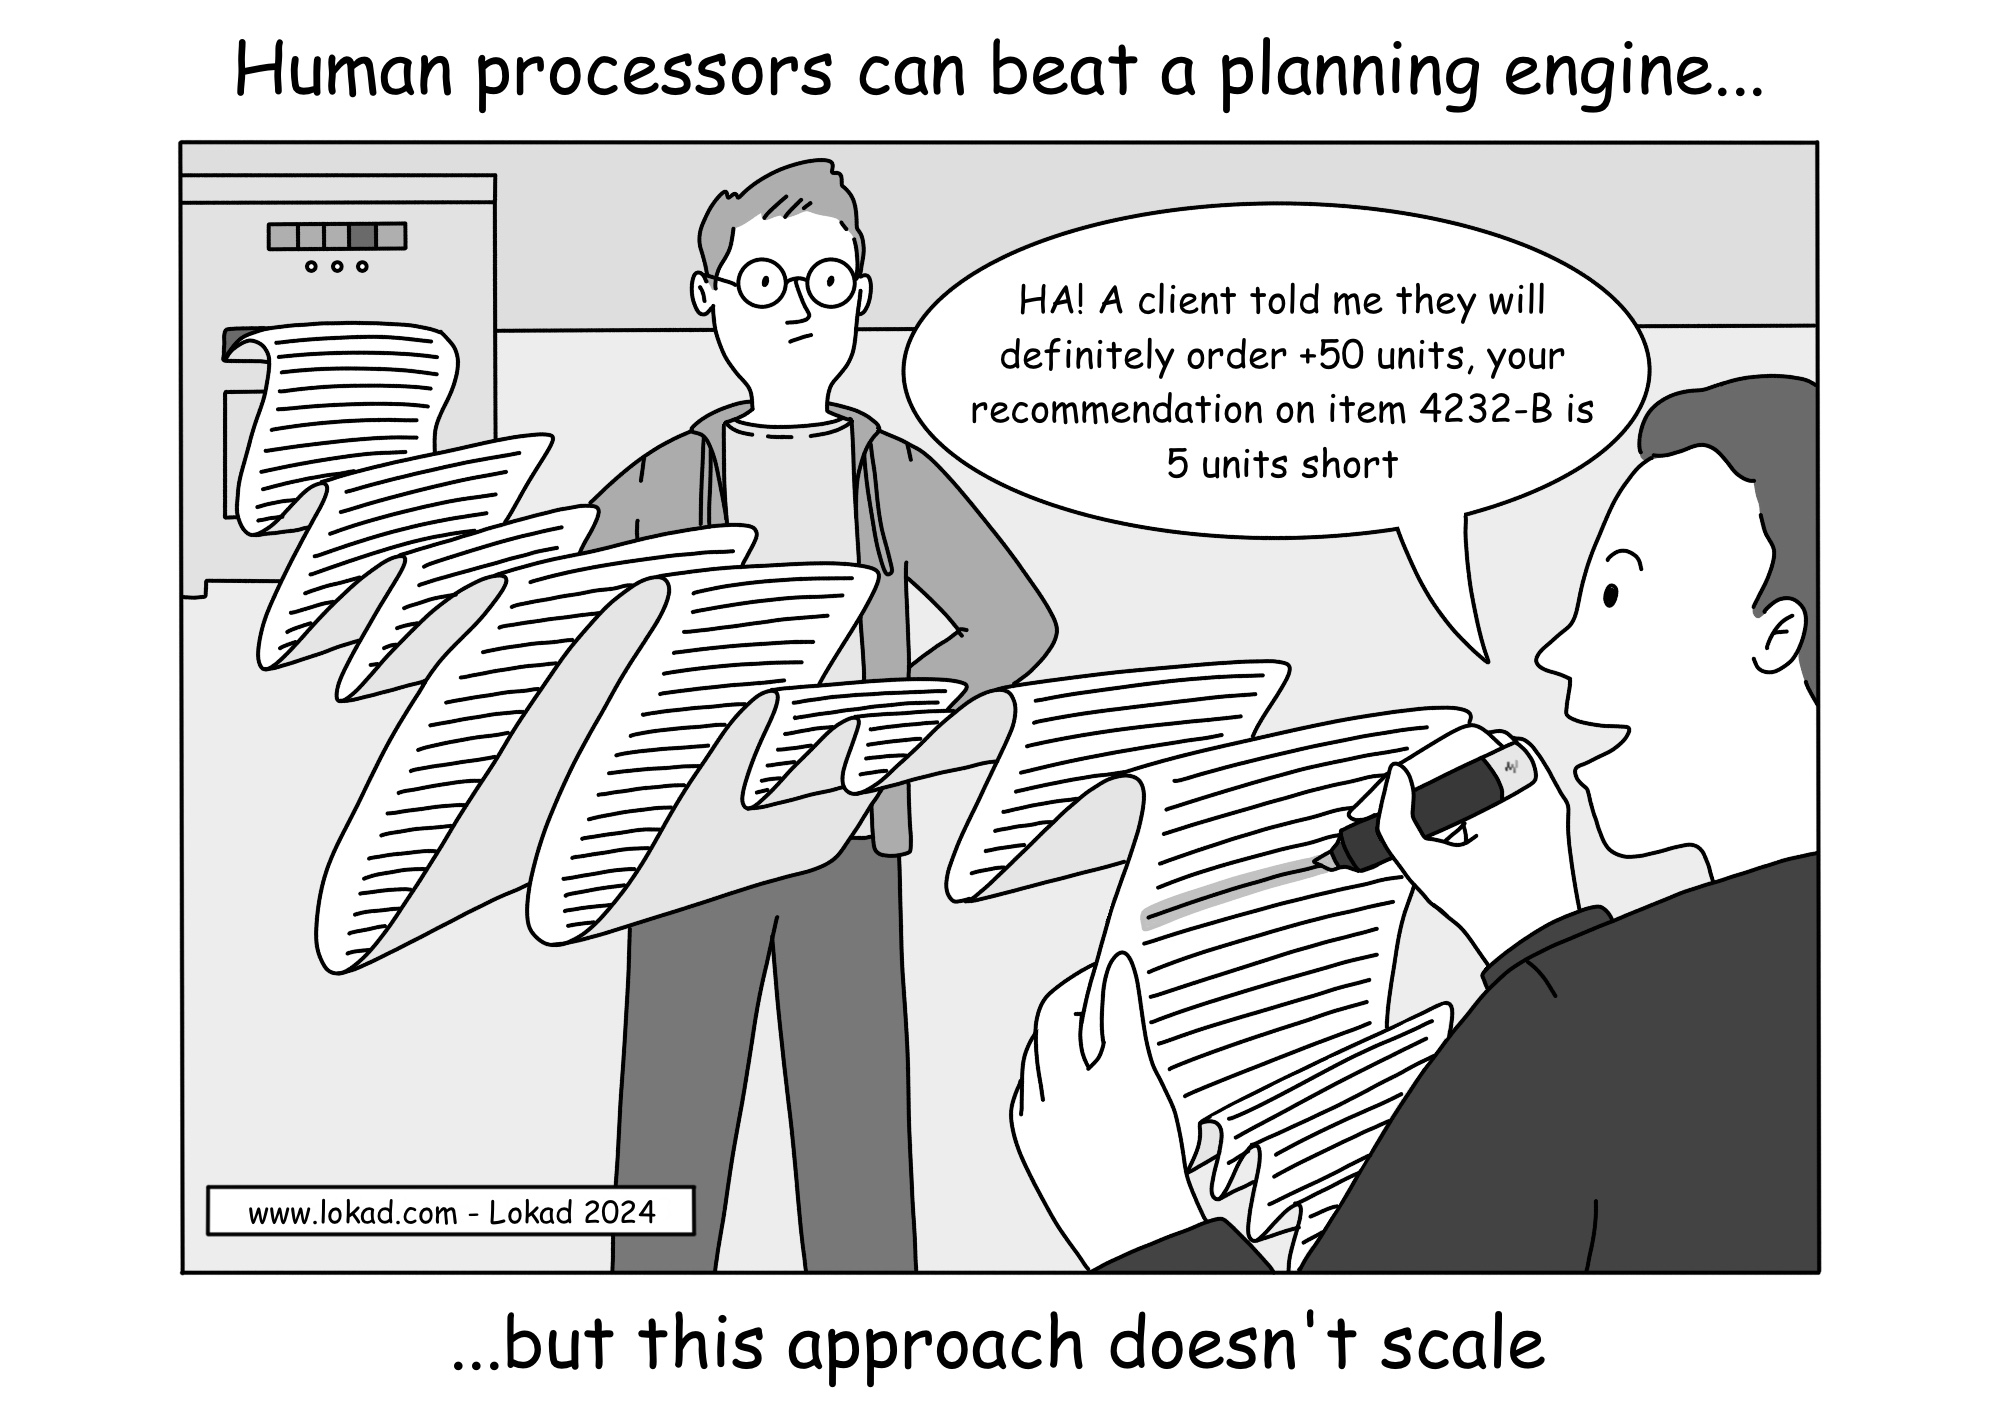 Human processors can beat a planning engine.